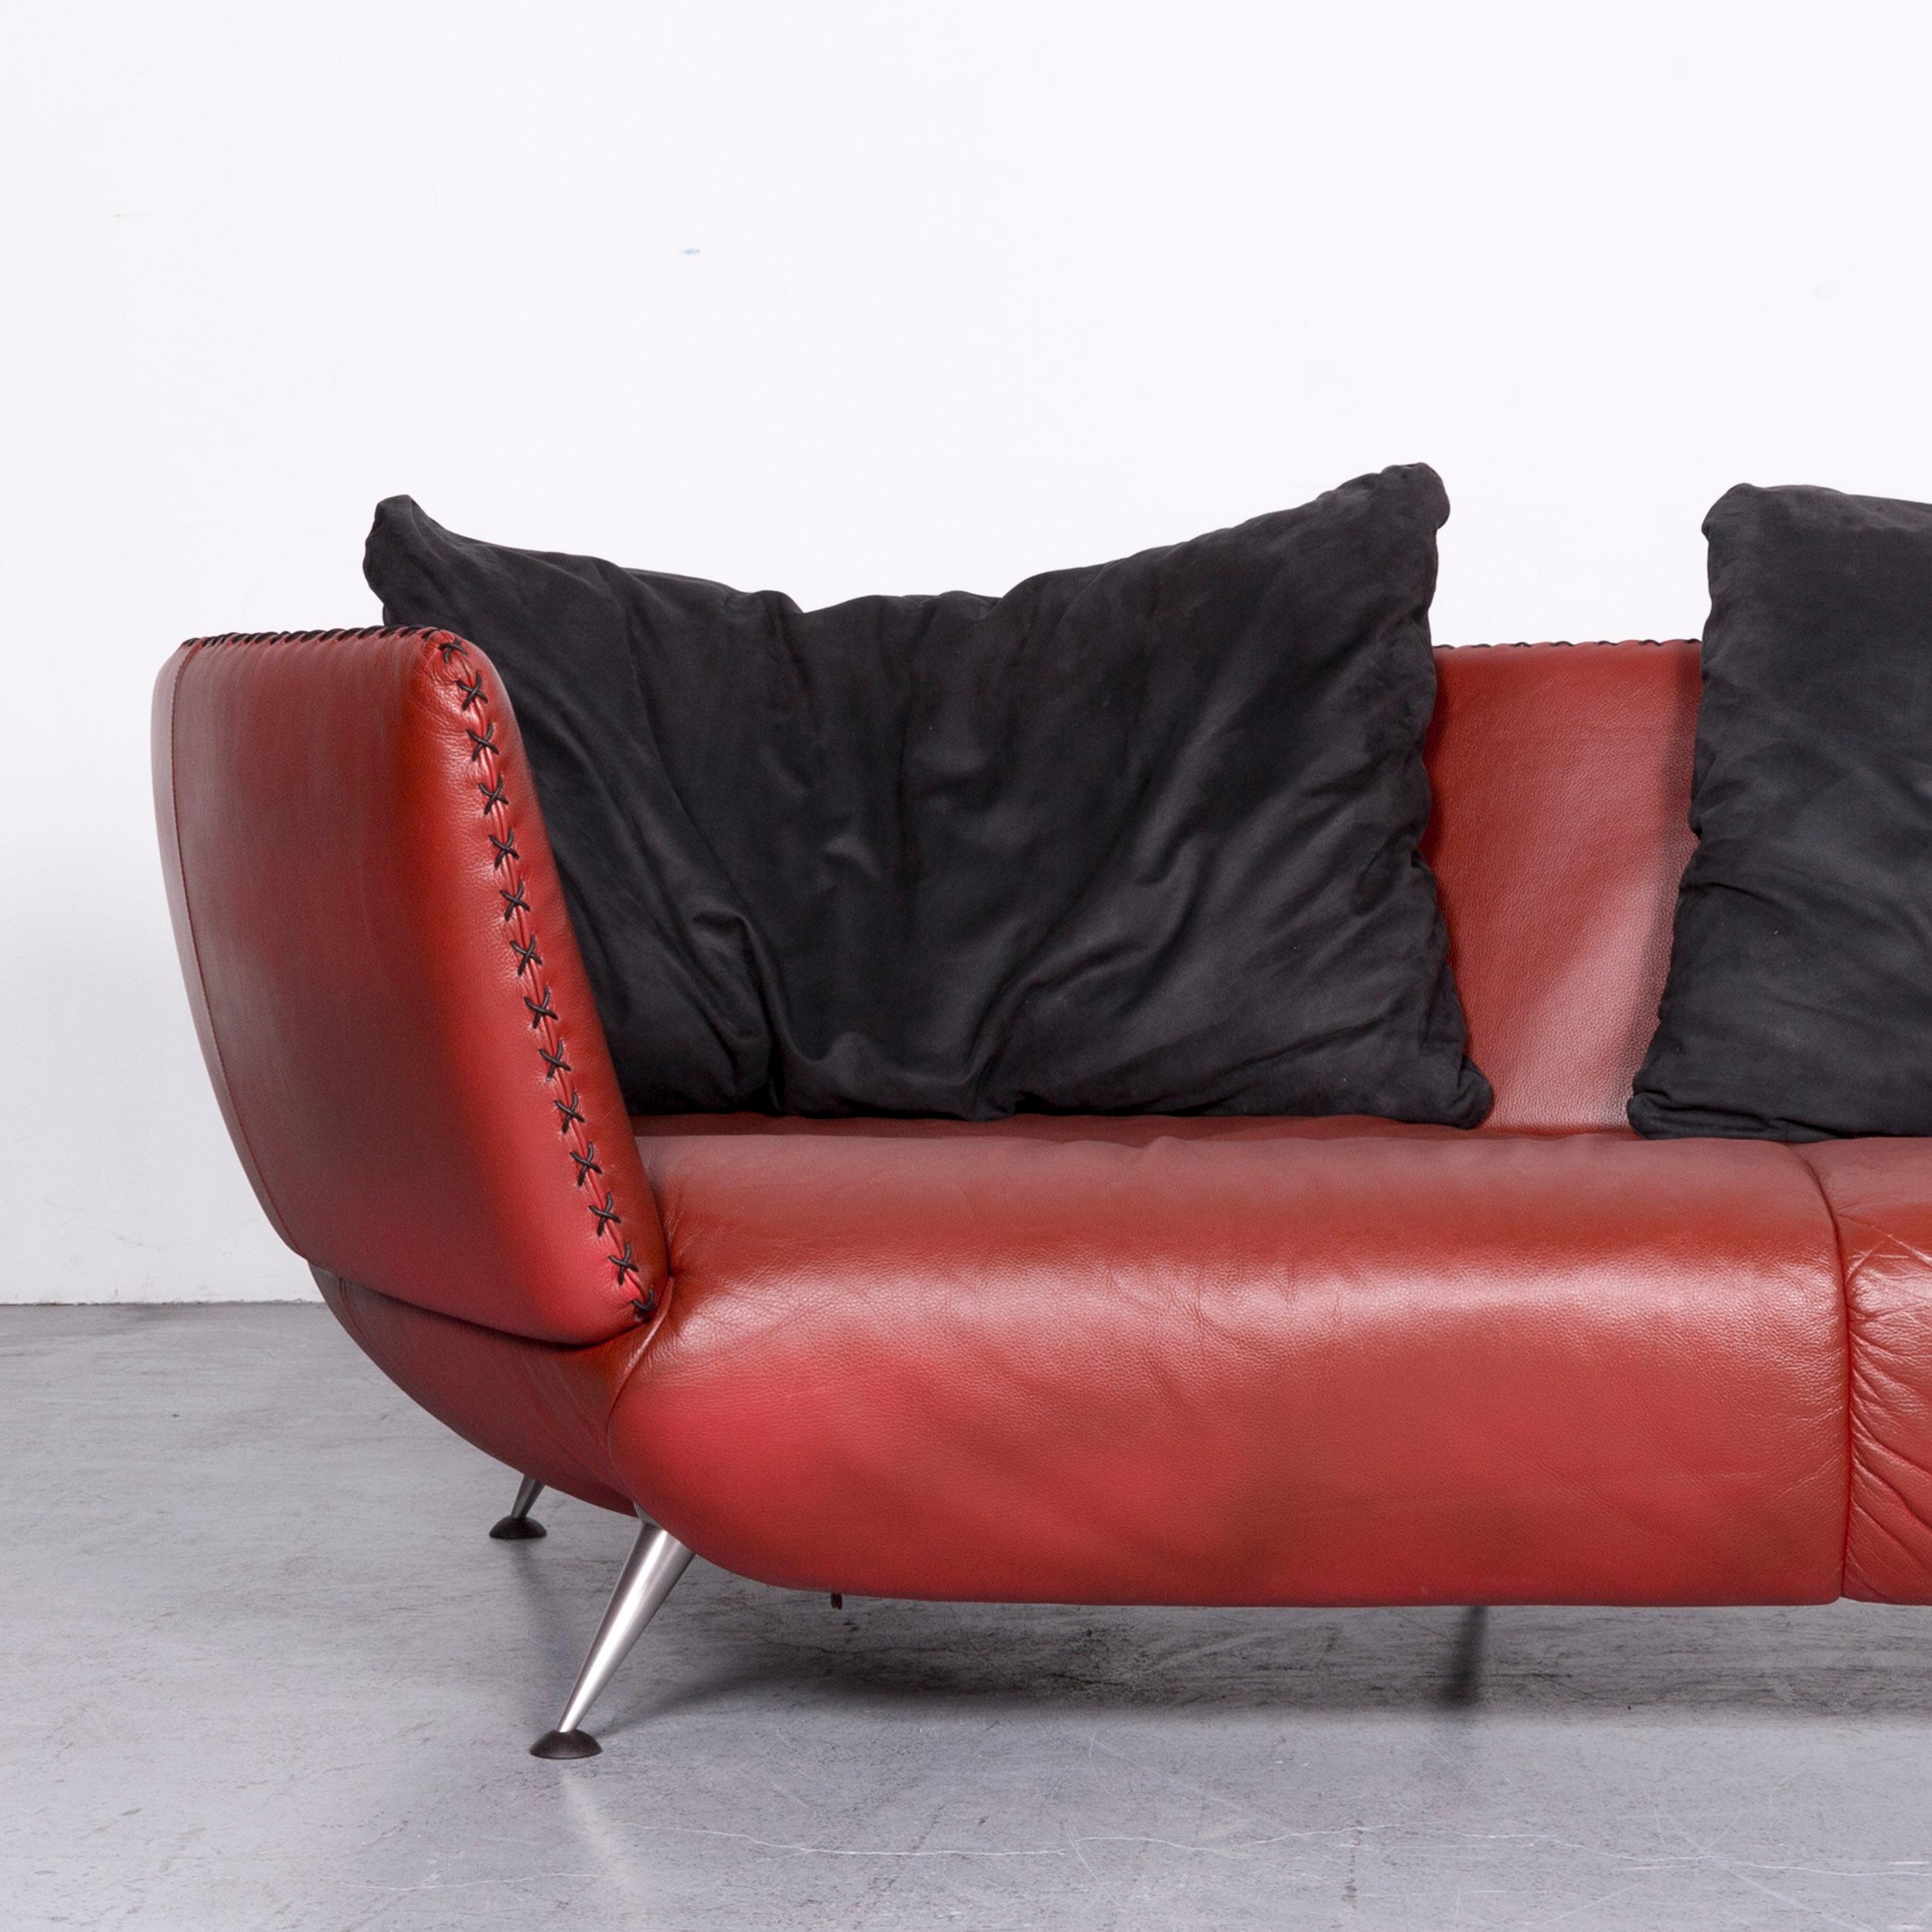 German De Sede Ds 102 Designer Leather Sofa Red Two-Seat Couch